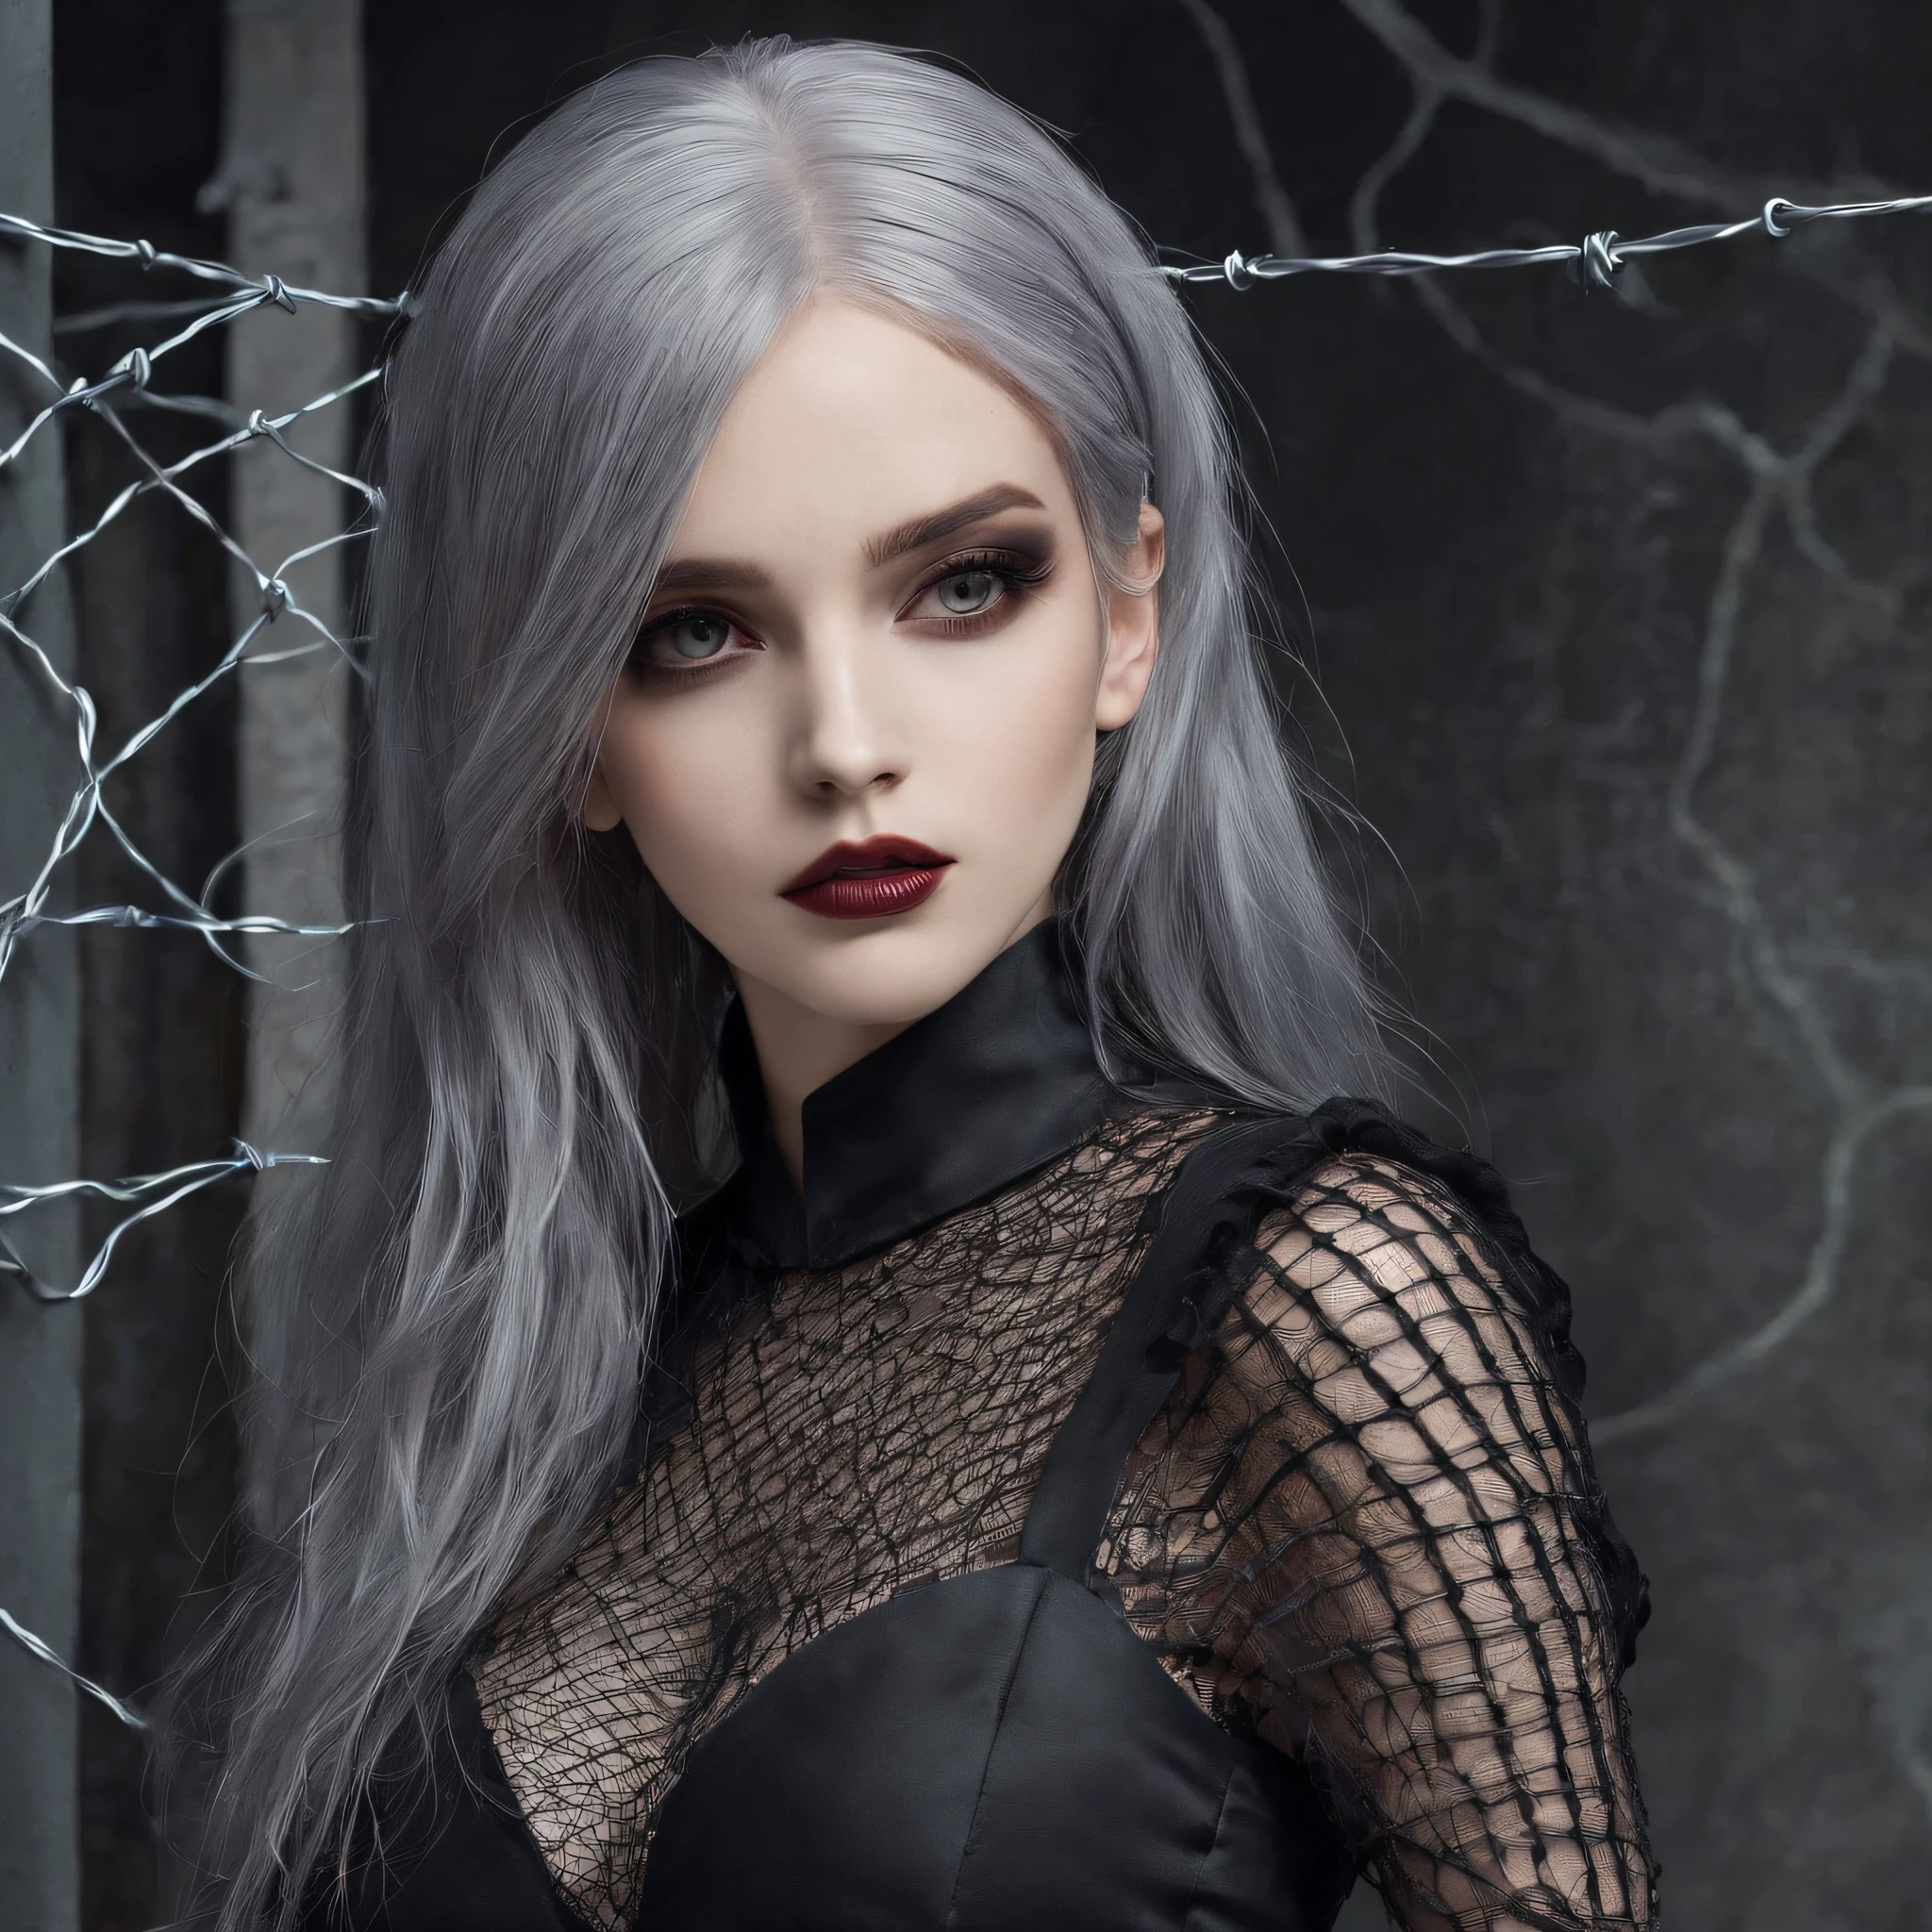 Girl in symbolic clothes of Gothic net, 。.。.com (Barbed wire for the body) brunette color hair，Gray hair ends